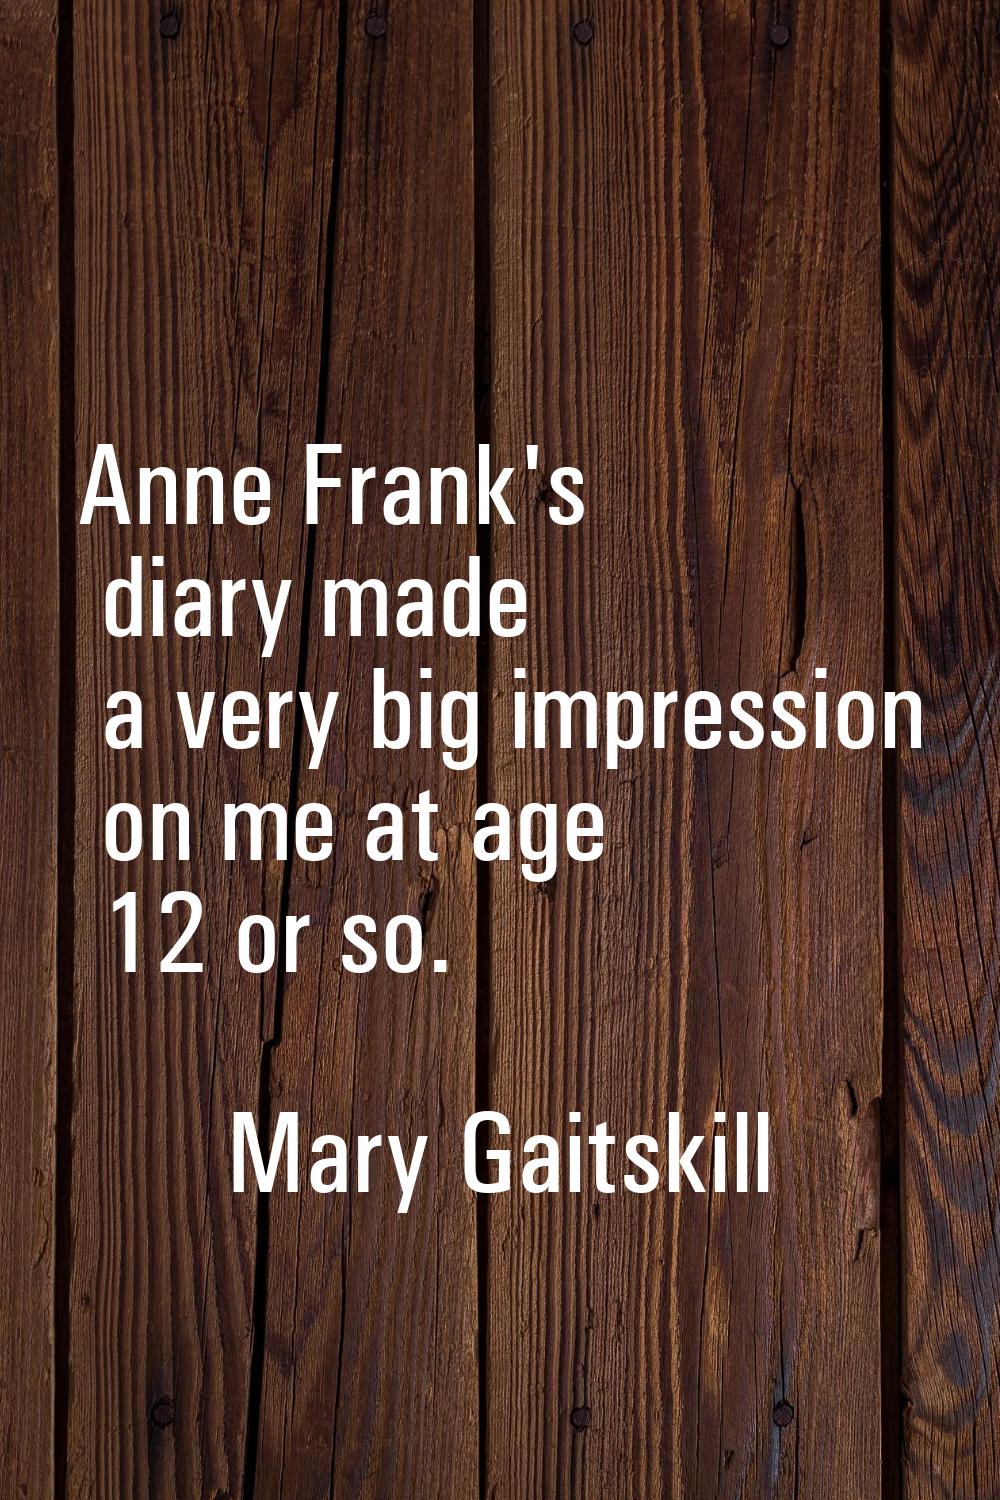 Anne Frank's diary made a very big impression on me at age 12 or so.